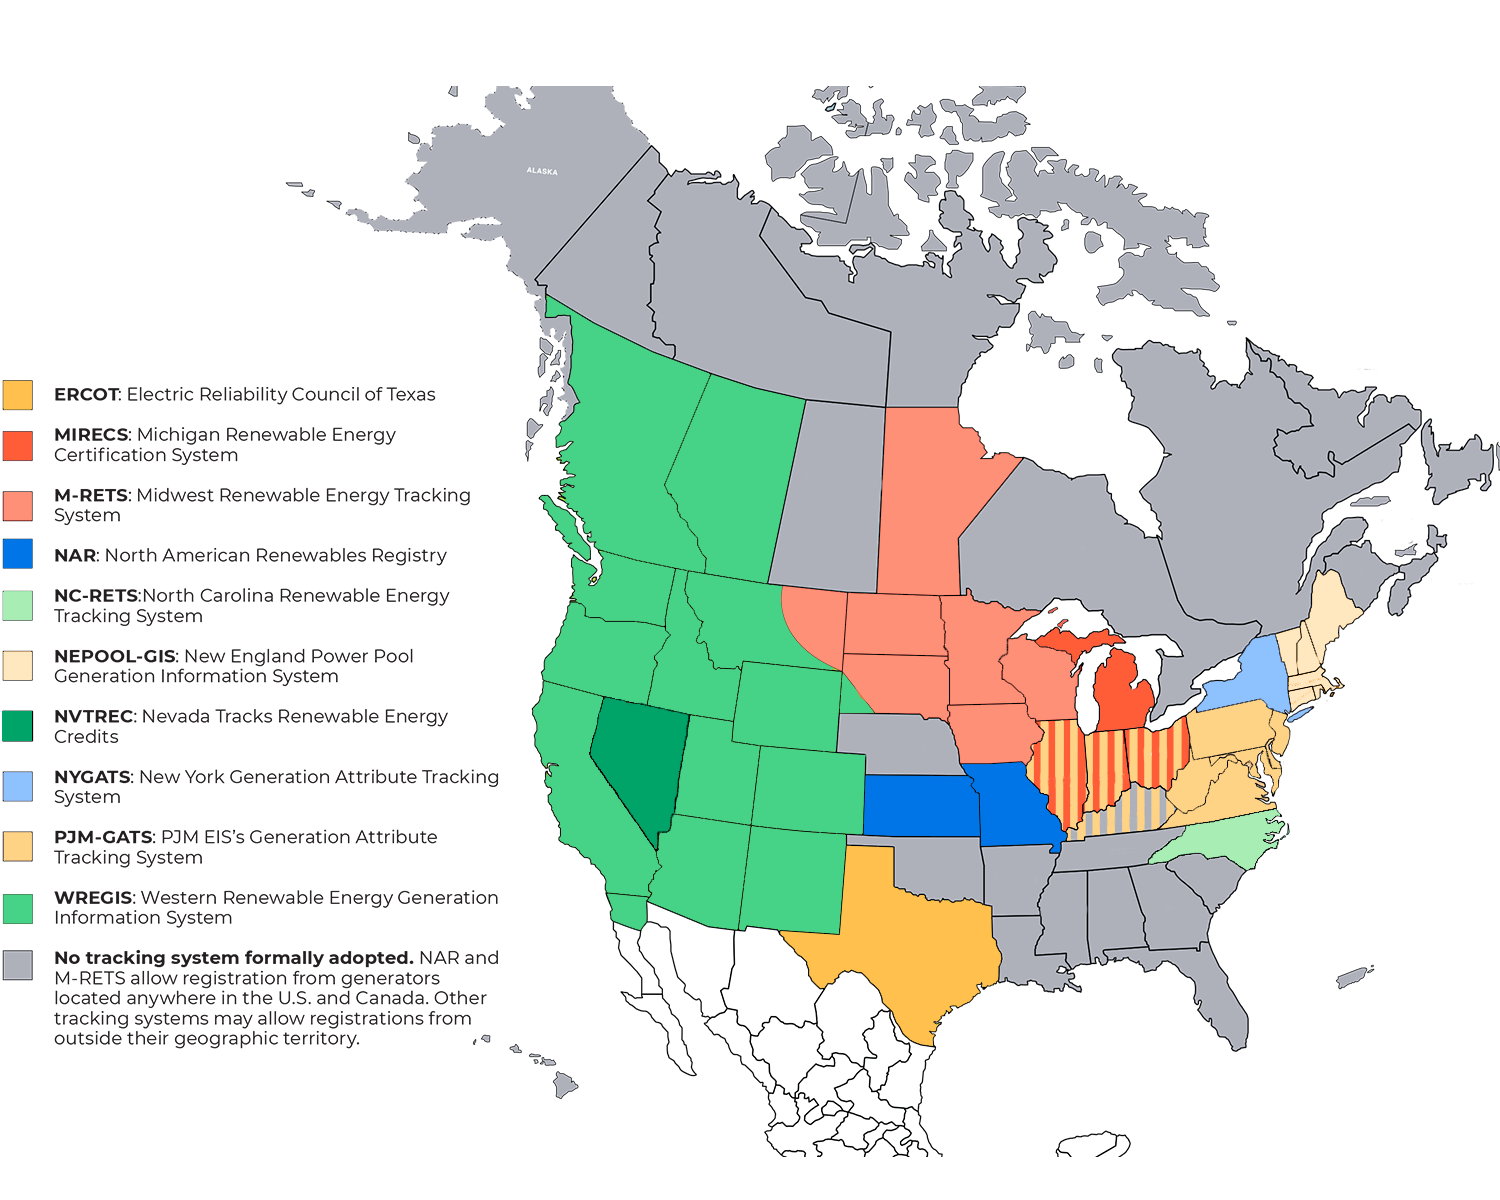 tracking systems or registries in the US and Canada